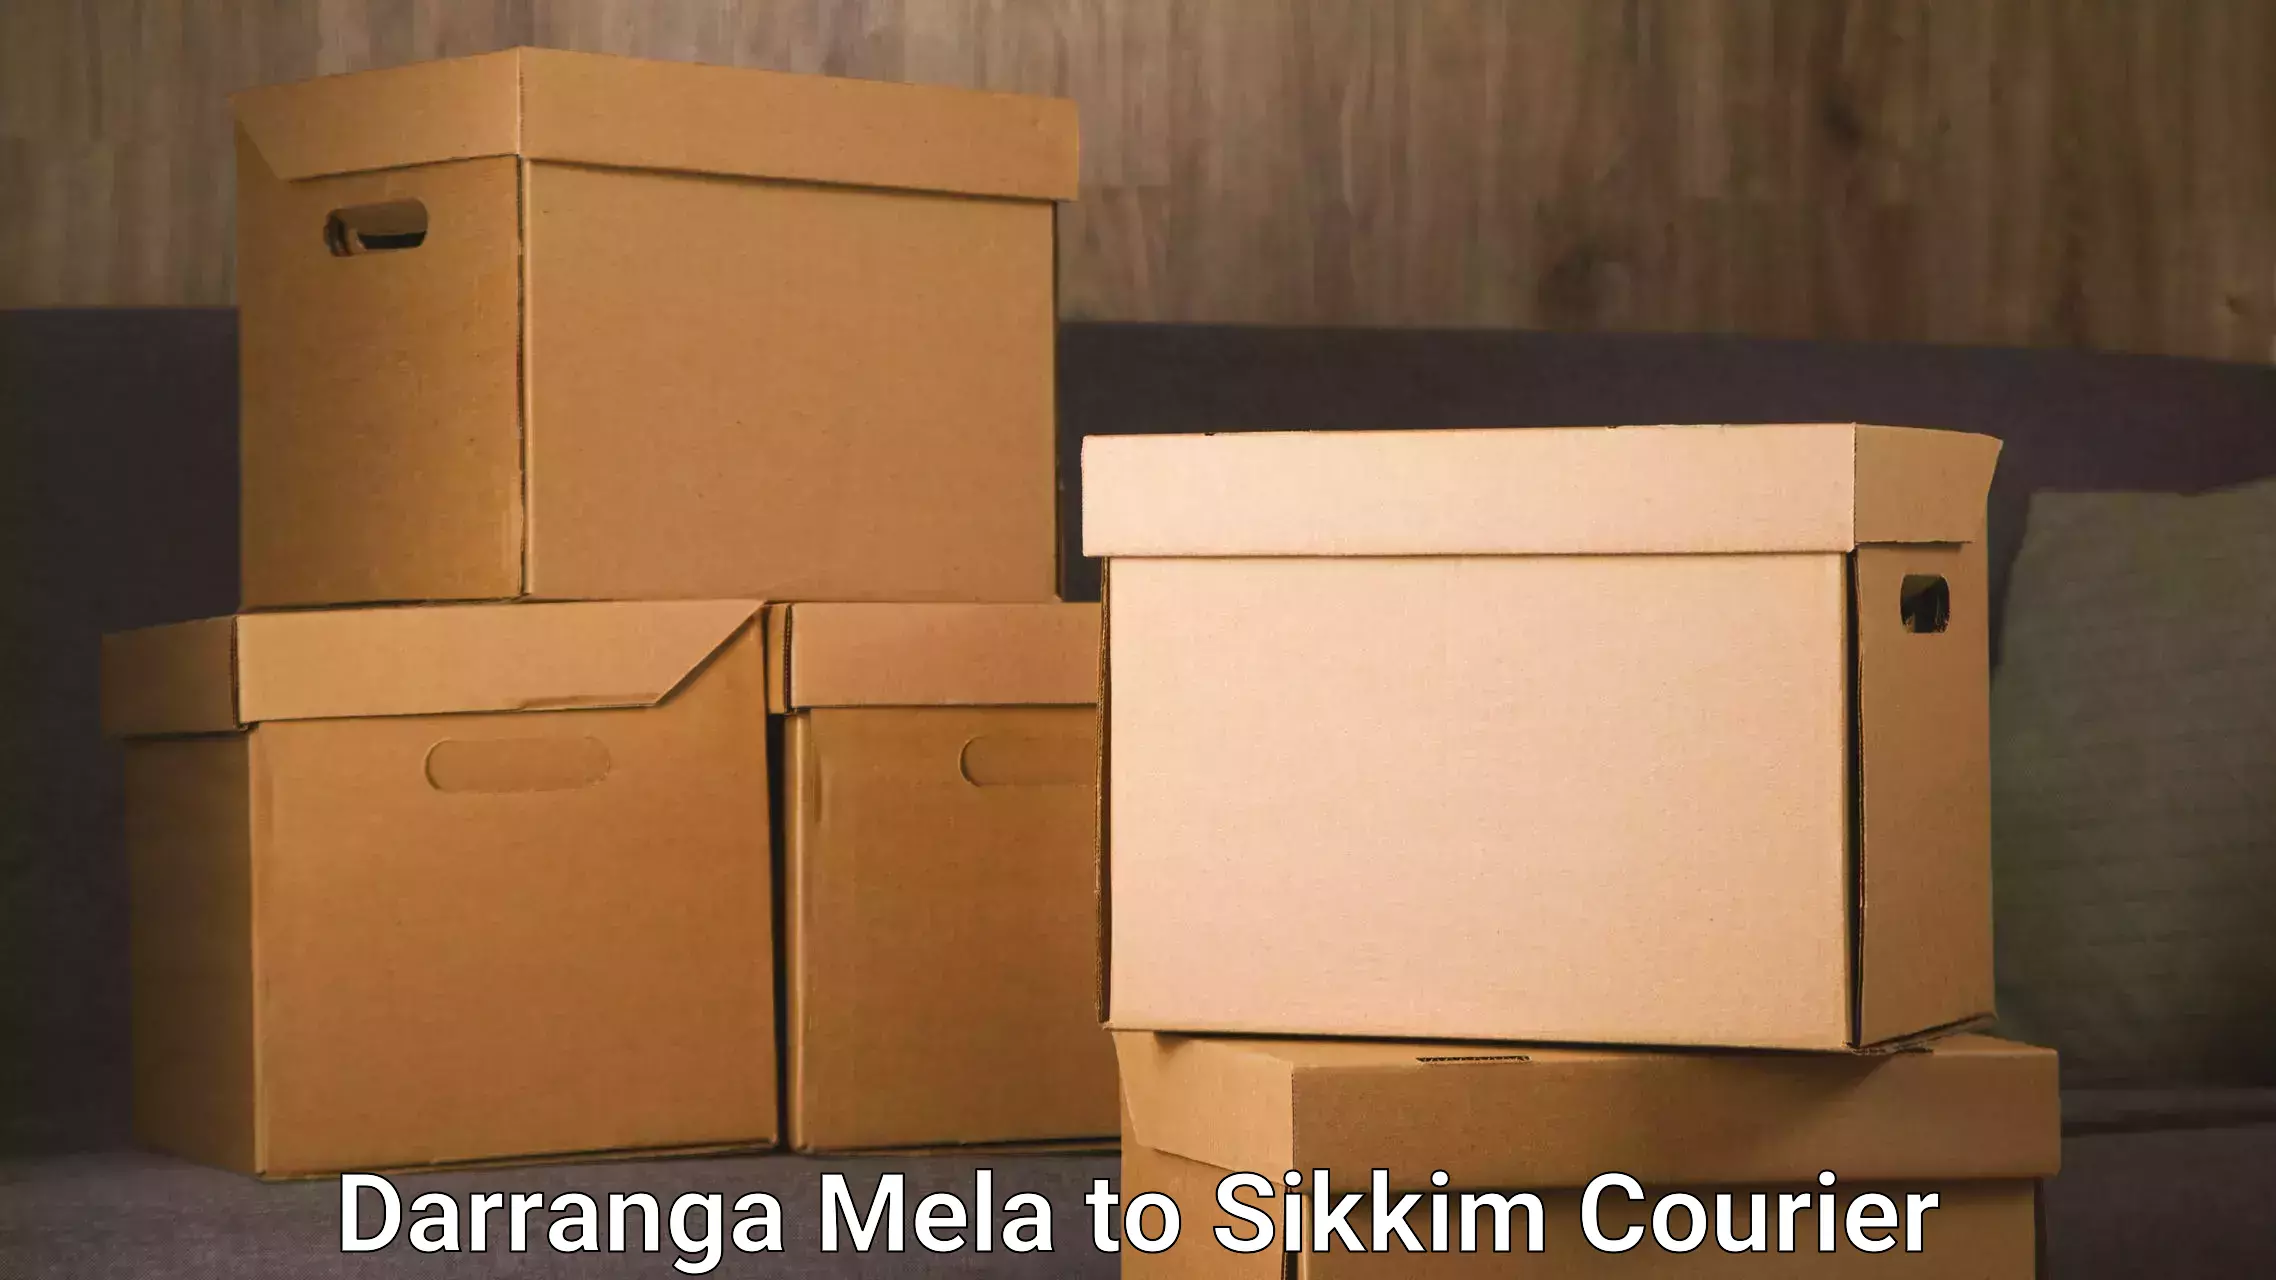 Package delivery network Darranga Mela to Ranipool